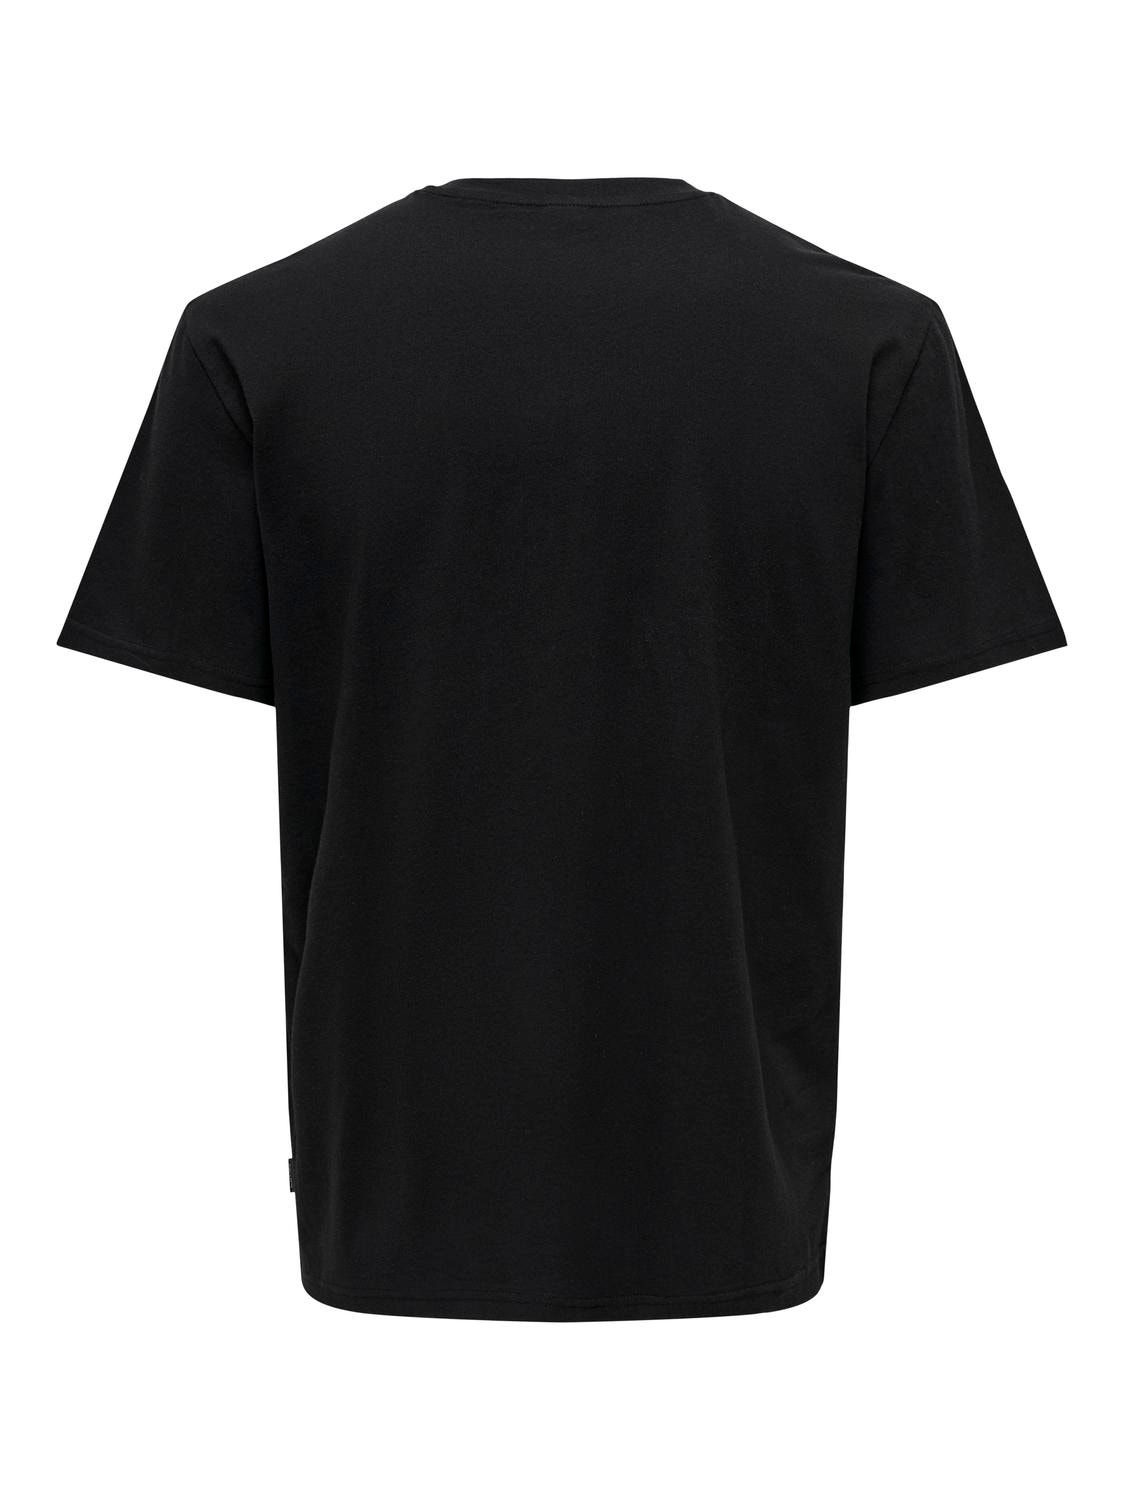 ONLY & SONS Regular Fit Round Neck T-Shirt -Black - 22028735